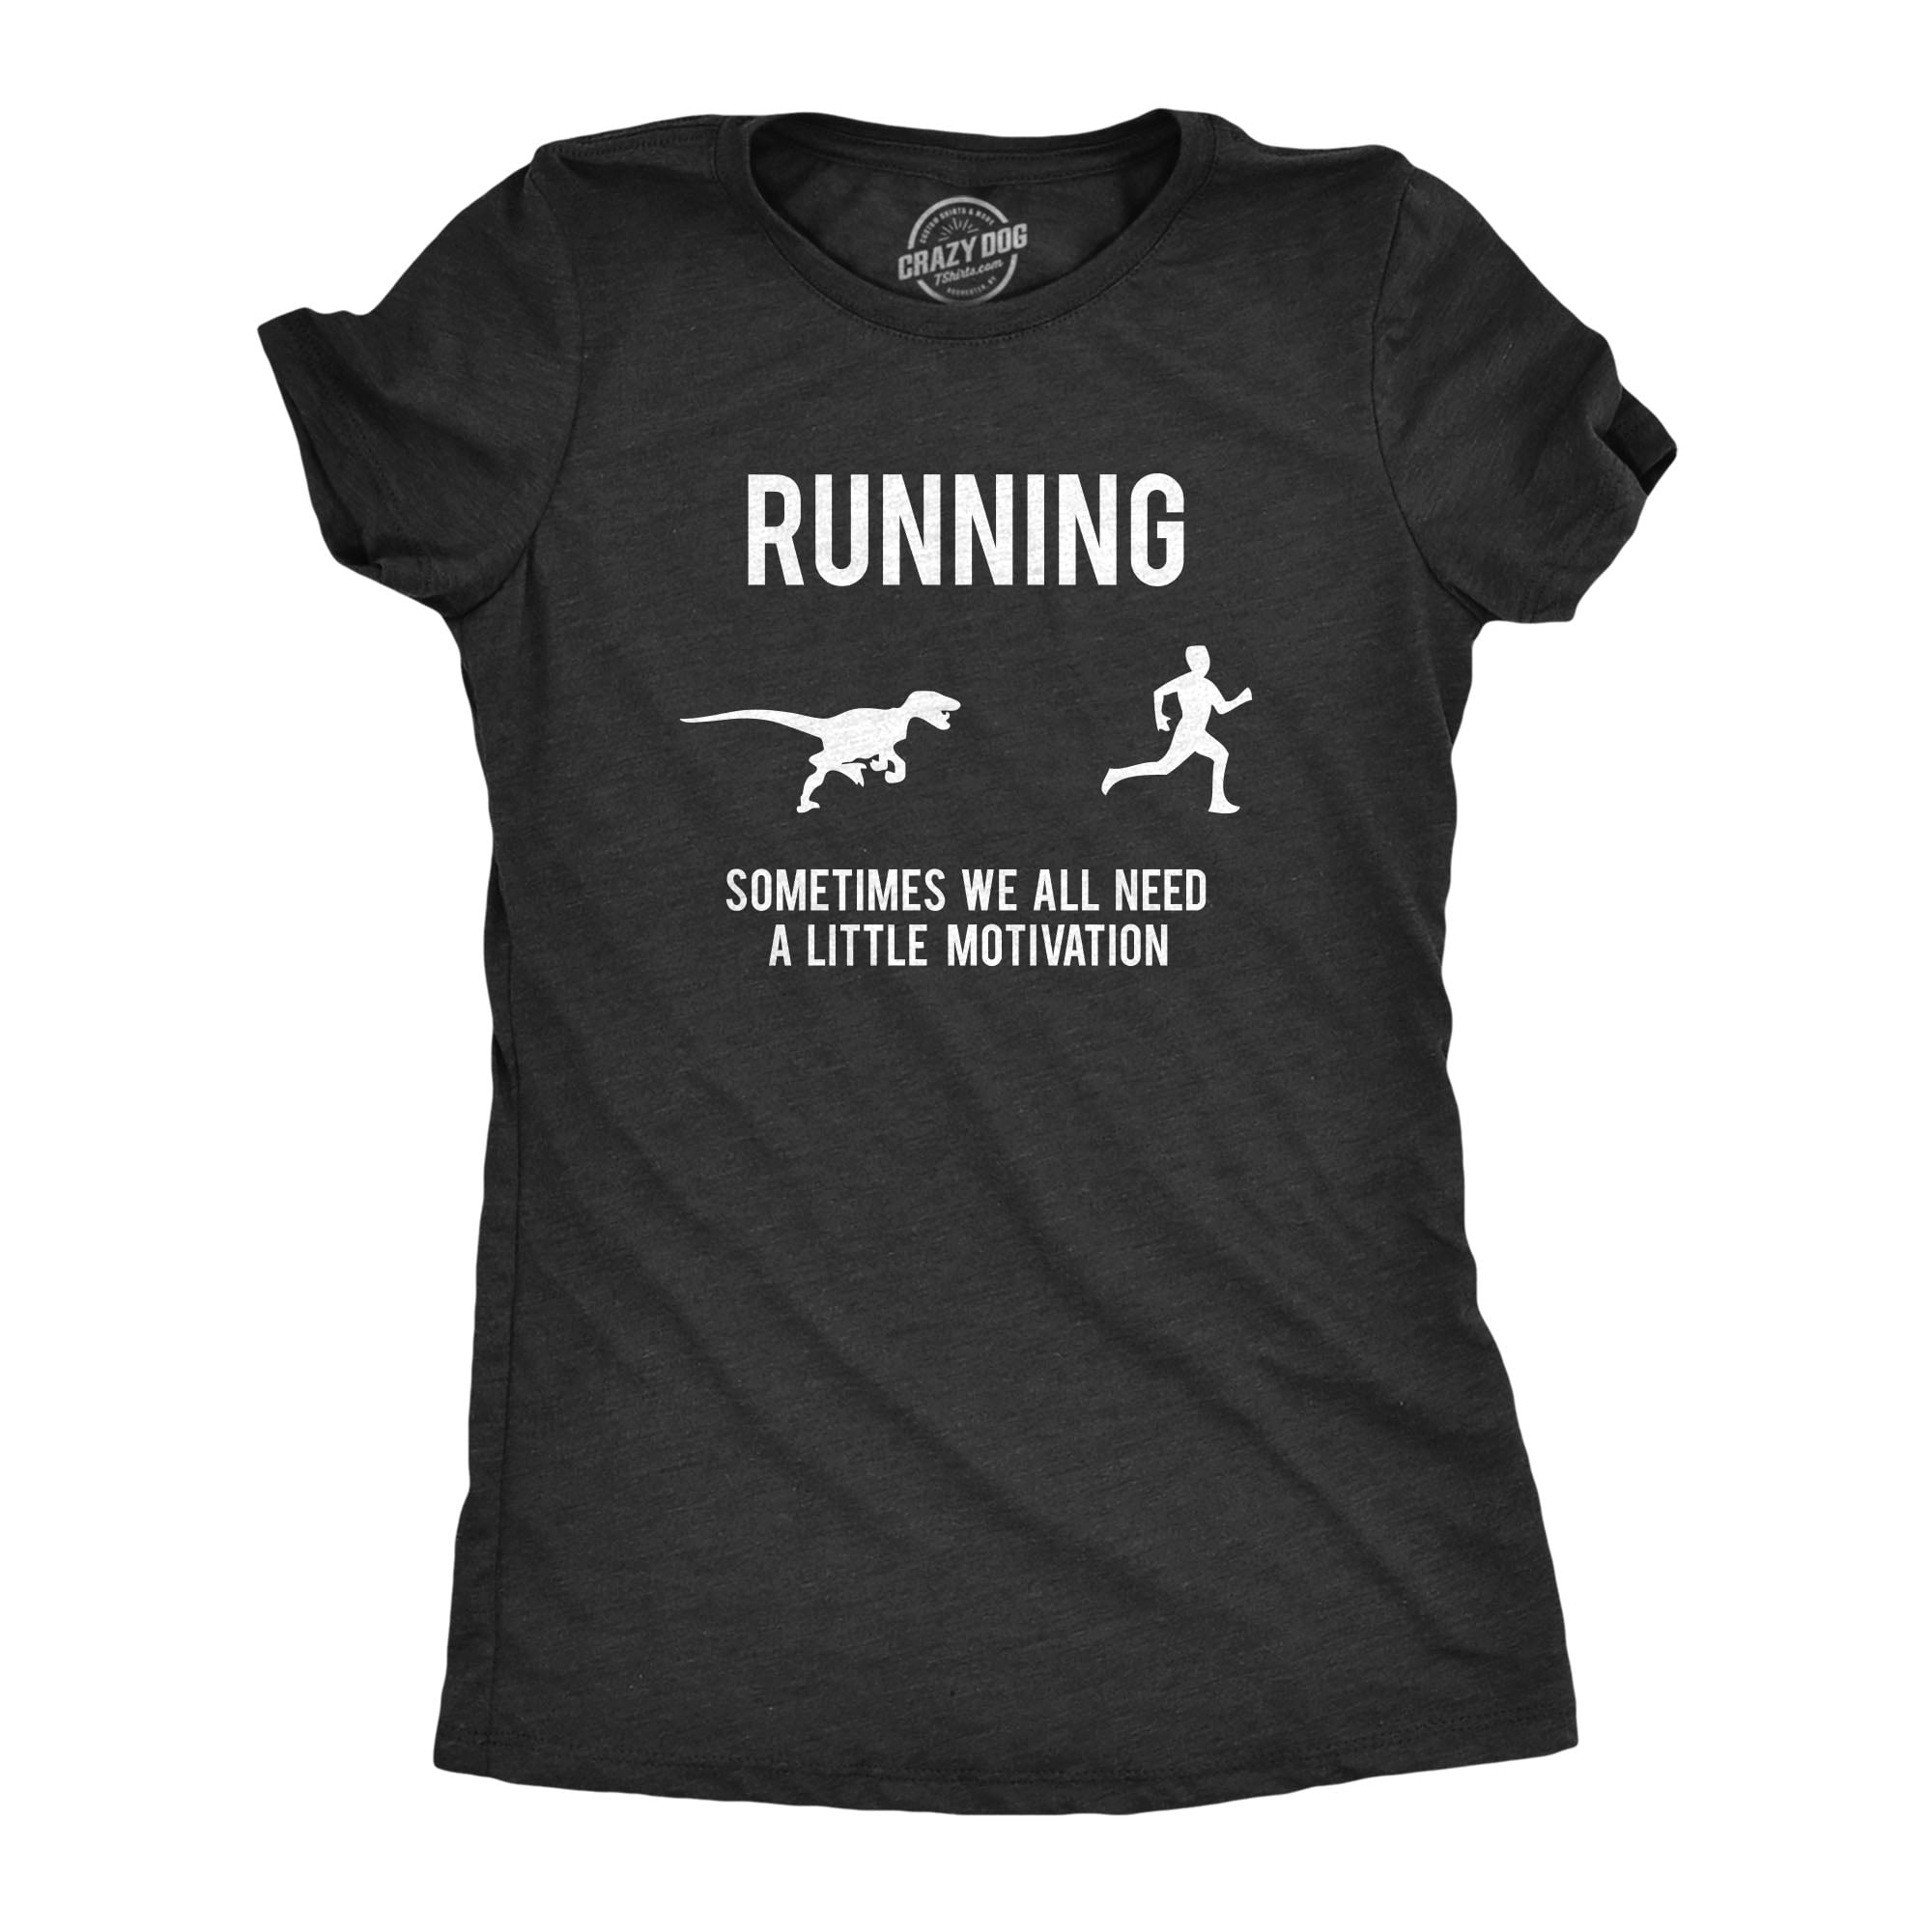 Im Only Half Crazy Running T-Shirt Funny Womens R Neck Sports Performance Tee